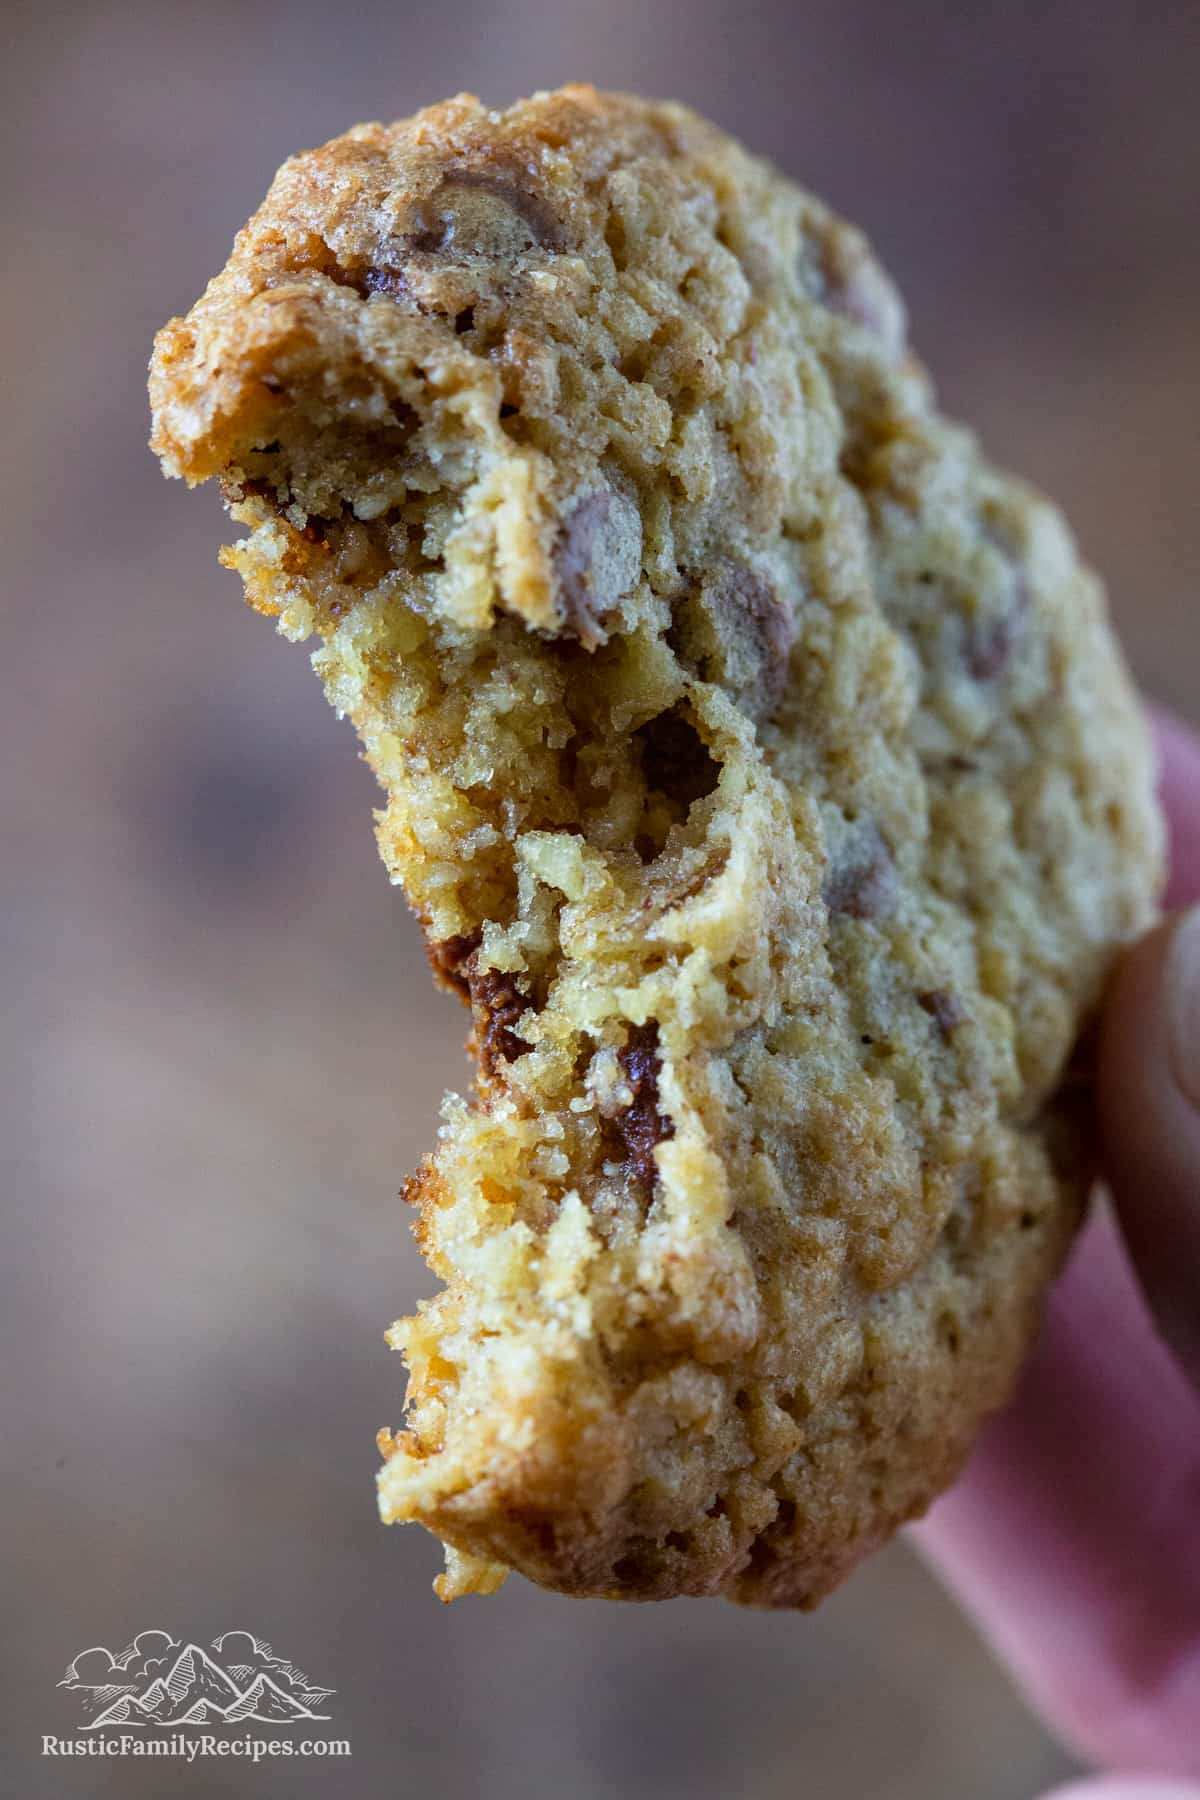 Close up of a peanut butter oatmeal chocolate chip cookie with a bite taken out